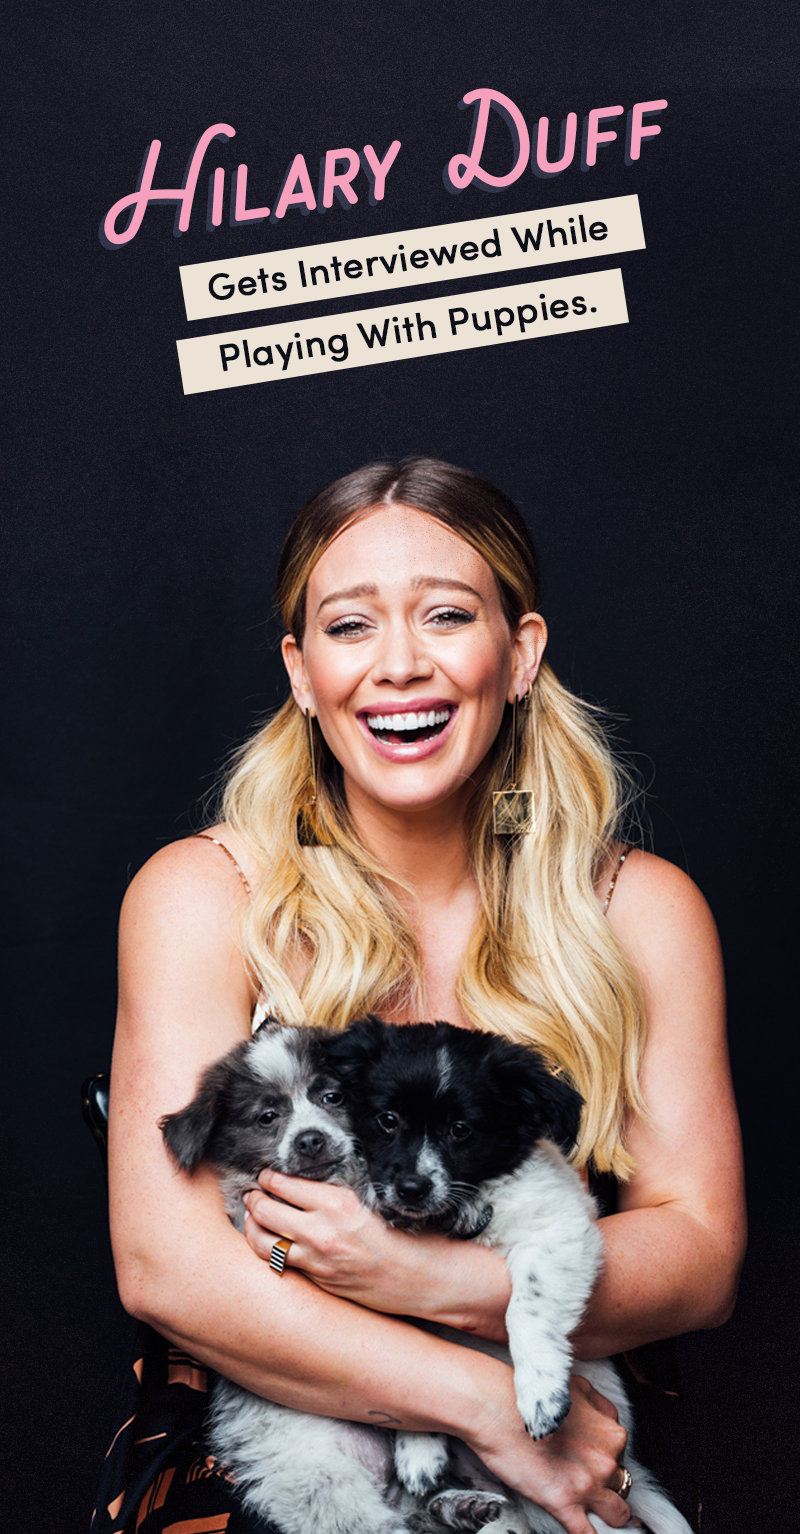 Hilary Duff: What's Up, Pup?: Photo 2532743